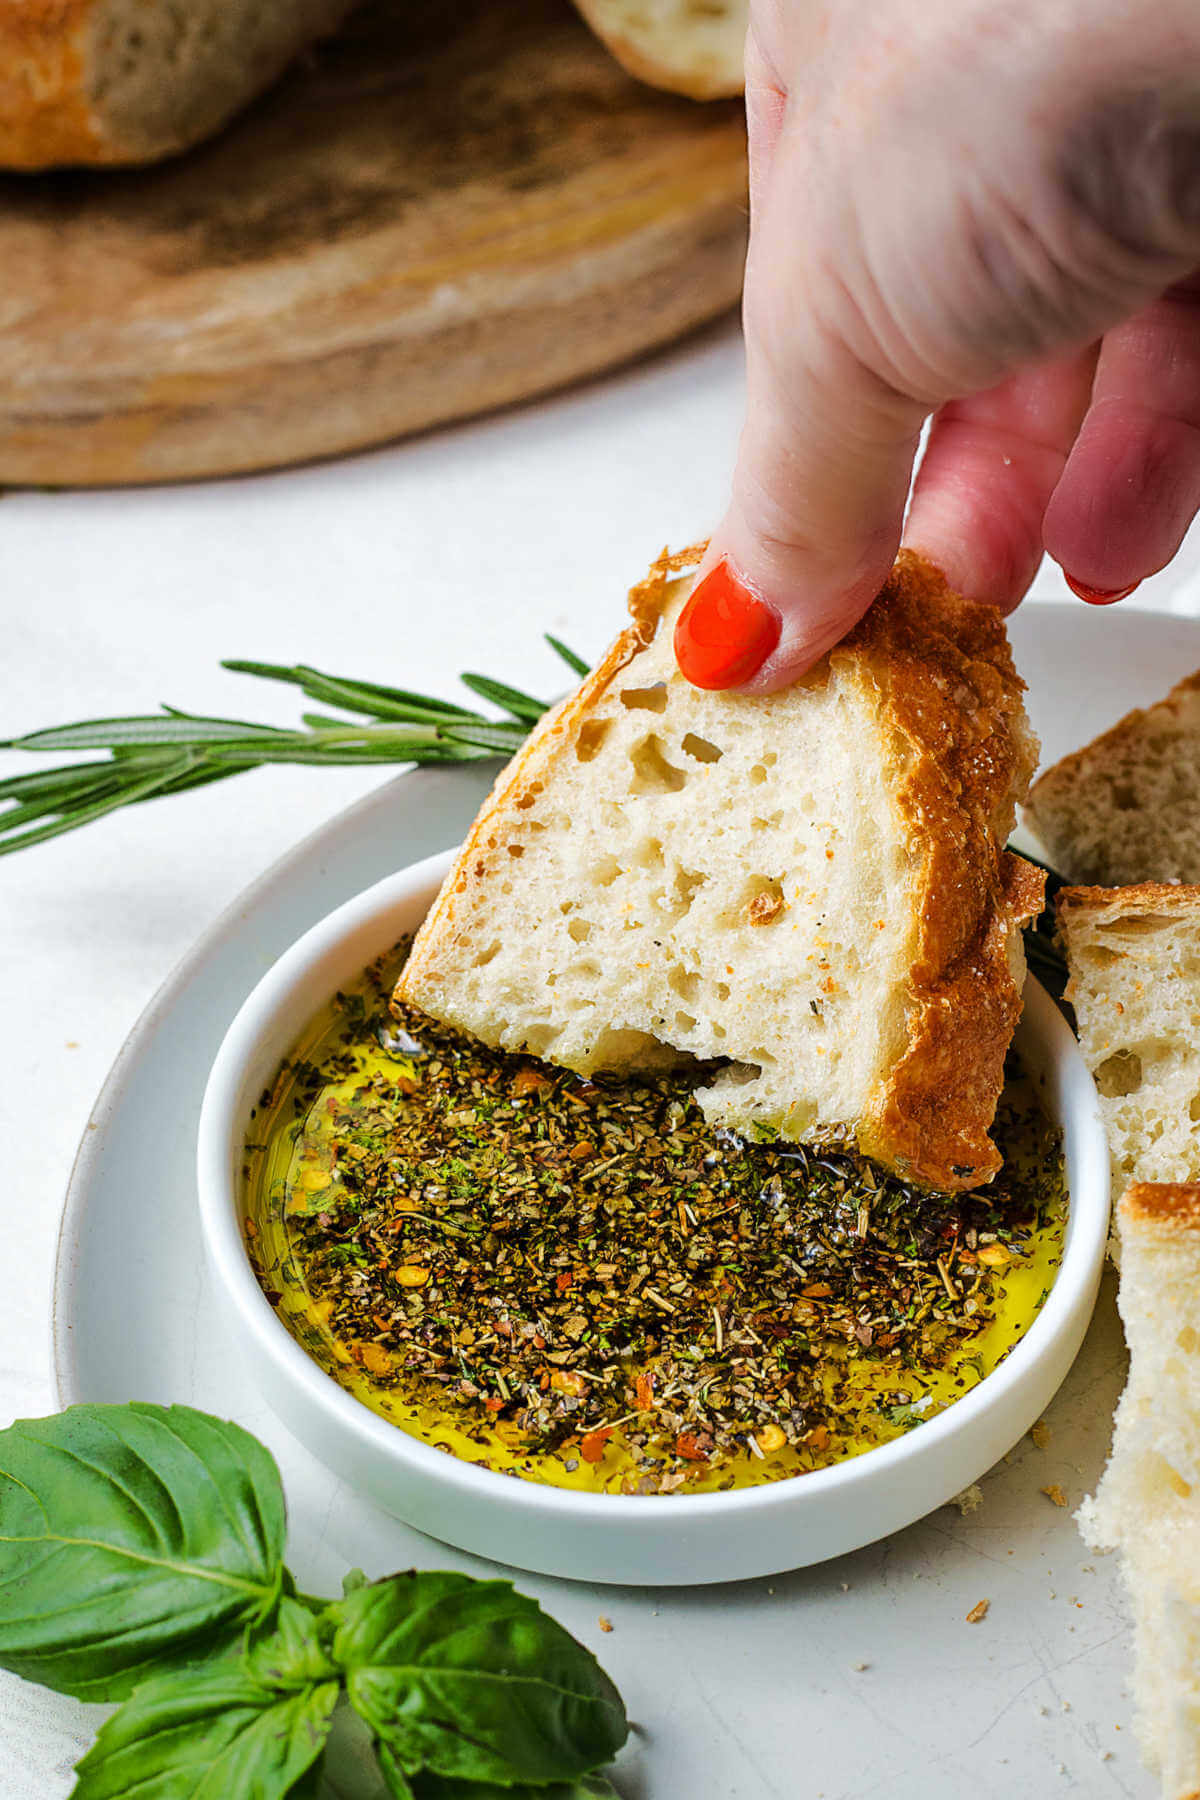 dipping a slice of bread into a bowl of olive oil dip on a table.